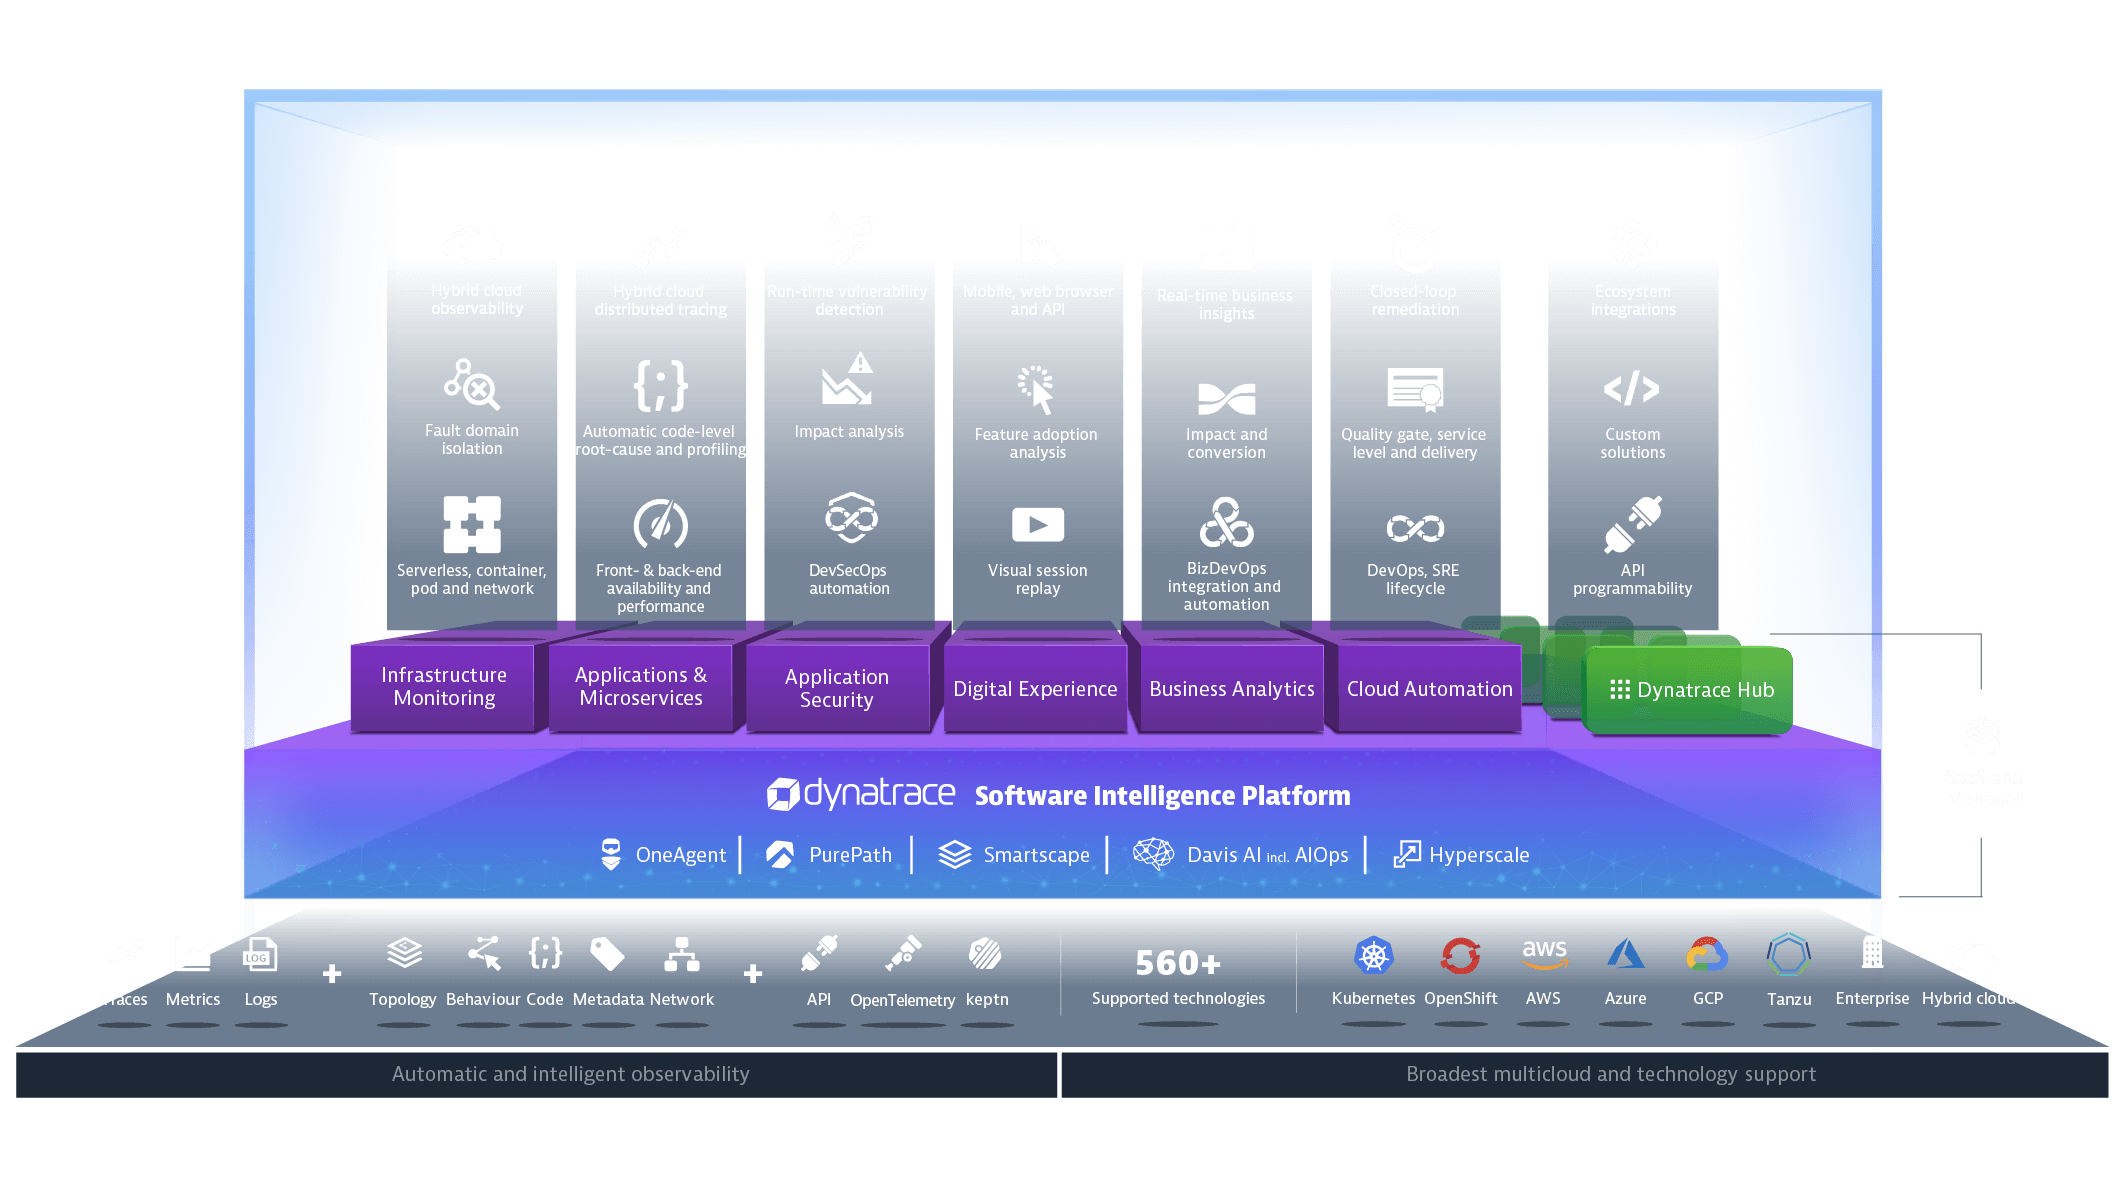 All-in-one platform